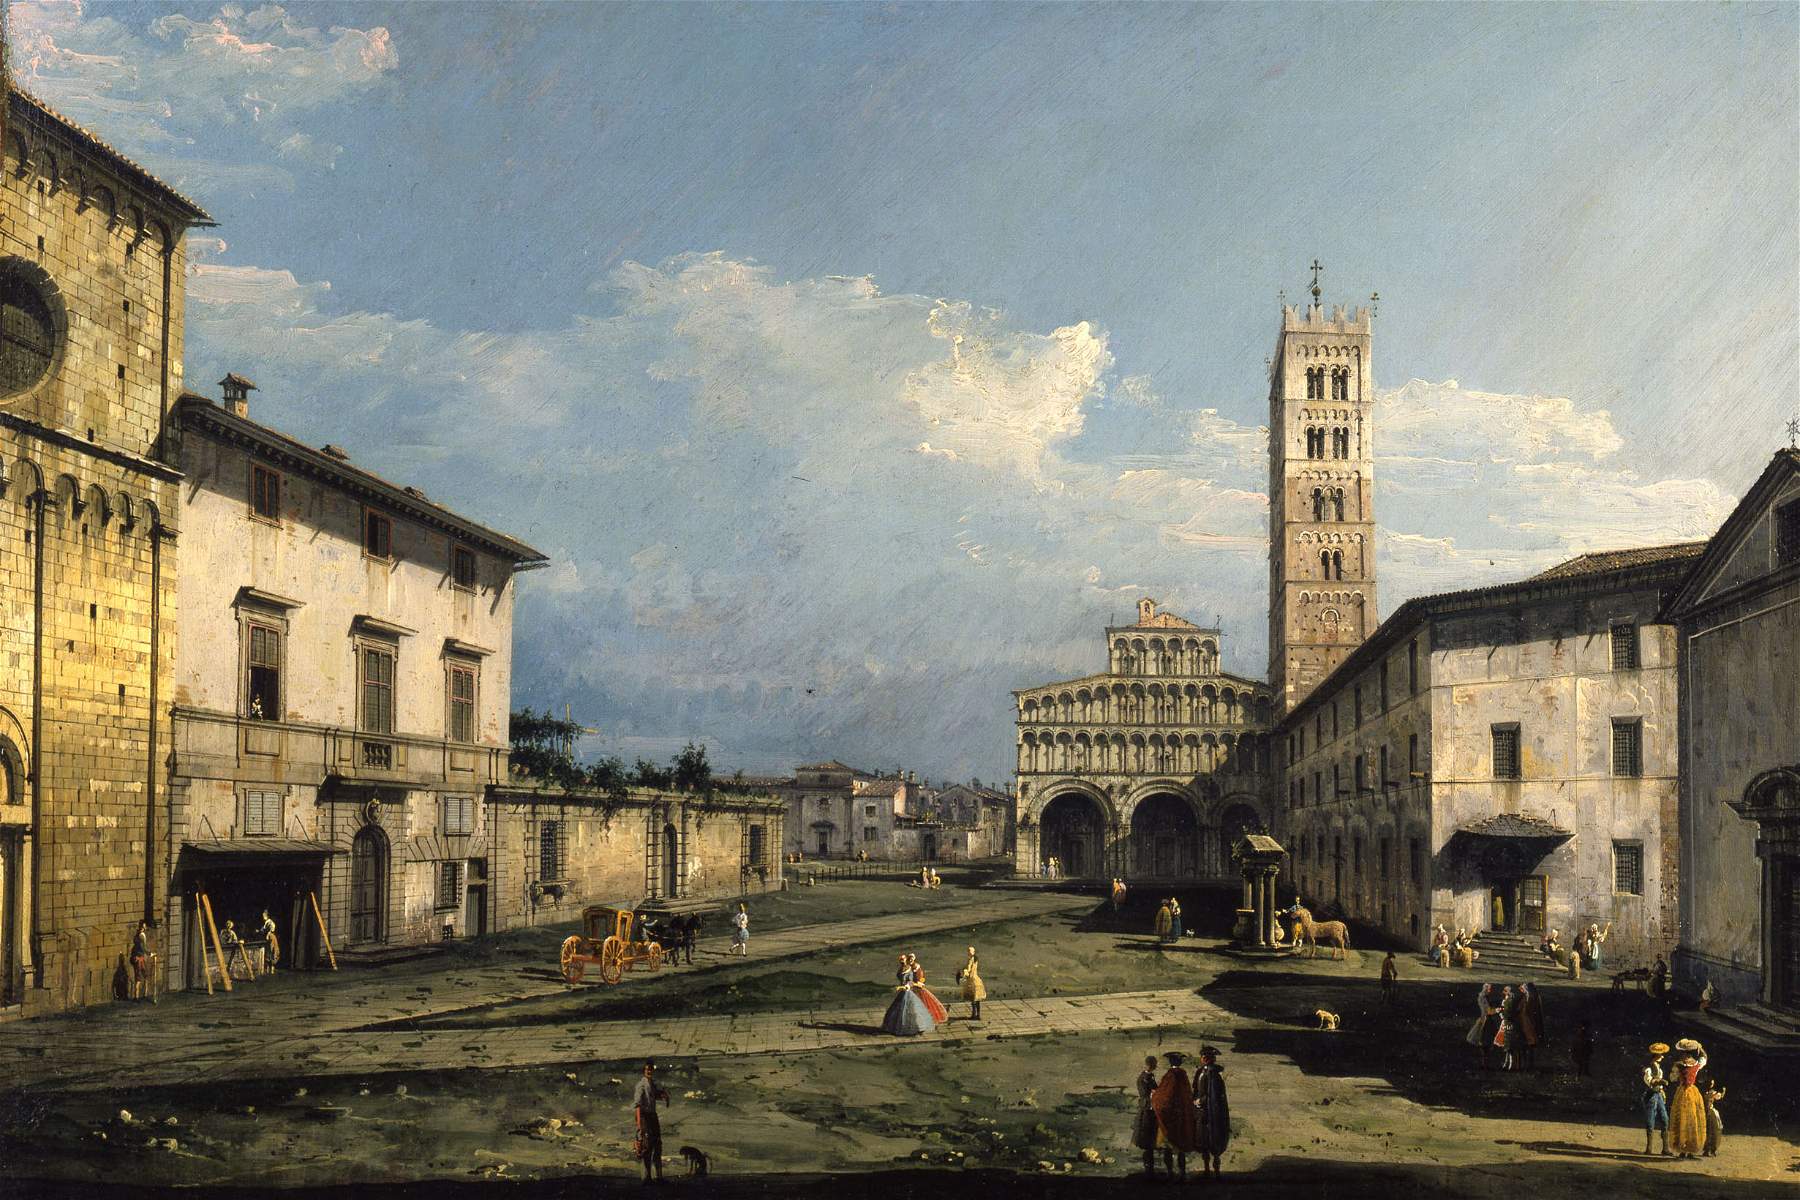 In Lucca, an exhibition traces Bernardo Bellotto's journey through Tuscany with never-before-seen discoveries